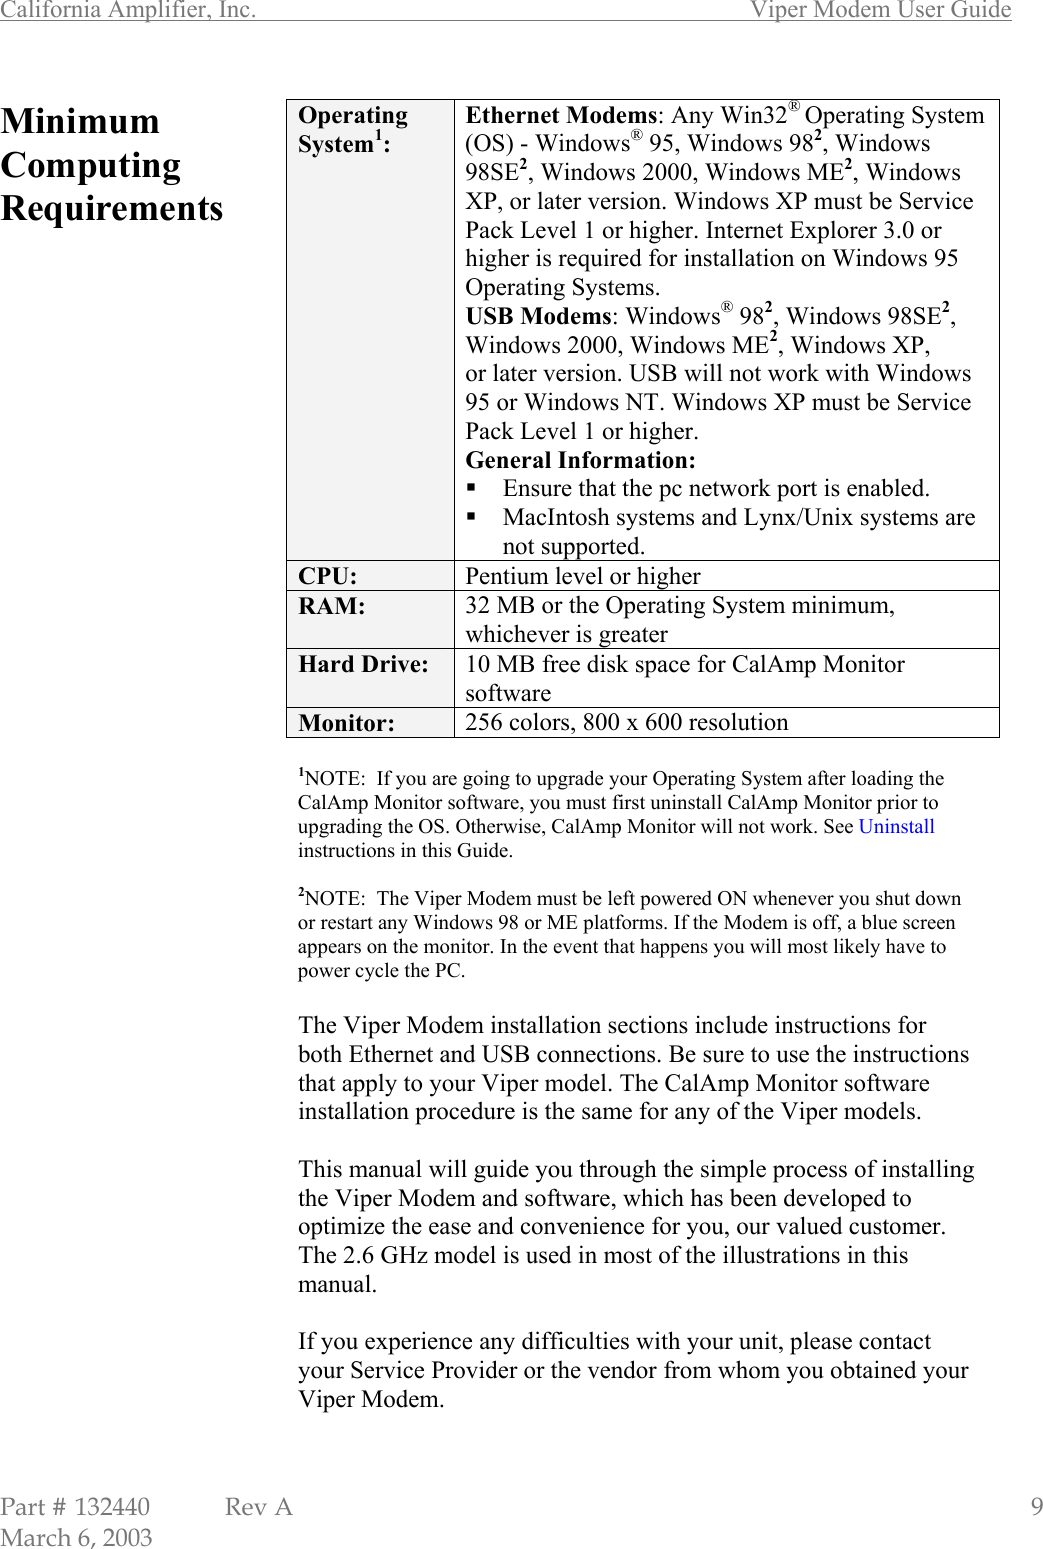 California Amplifier, Inc.       Viper Modem User Guide Part # 132440  Rev A                                                   9 March 6, 2003 Minimum Computing Requirements                                           Operating System1: Ethernet Modems: Any Win32® Operating System (OS) - Windows® 95, Windows 982, Windows 98SE2, Windows 2000, Windows ME2, Windows XP, or later version. Windows XP must be Service Pack Level 1 or higher. Internet Explorer 3.0 or higher is required for installation on Windows 95 Operating Systems. USB Modems: Windows® 982, Windows 98SE2, Windows 2000, Windows ME2, Windows XP, or later version. USB will not work with Windows 95 or Windows NT. Windows XP must be Service Pack Level 1 or higher. General Information:  Ensure that the pc network port is enabled.  MacIntosh systems and Lynx/Unix systems are not supported. CPU:  Pentium level or higher RAM:  32 MB or the Operating System minimum, whichever is greater Hard Drive:  10 MB free disk space for CalAmp Monitor software Monitor:  256 colors, 800 x 600 resolution   1NOTE:  If you are going to upgrade your Operating System after loading the CalAmp Monitor software, you must first uninstall CalAmp Monitor prior to upgrading the OS. Otherwise, CalAmp Monitor will not work. See Uninstall instructions in this Guide.  2NOTE:  The Viper Modem must be left powered ON whenever you shut down or restart any Windows 98 or ME platforms. If the Modem is off, a blue screen appears on the monitor. In the event that happens you will most likely have to power cycle the PC.  The Viper Modem installation sections include instructions for both Ethernet and USB connections. Be sure to use the instructions that apply to your Viper model. The CalAmp Monitor software installation procedure is the same for any of the Viper models.  This manual will guide you through the simple process of installing the Viper Modem and software, which has been developed to optimize the ease and convenience for you, our valued customer. The 2.6 GHz model is used in most of the illustrations in this manual.   If you experience any difficulties with your unit, please contact your Service Provider or the vendor from whom you obtained your Viper Modem.  